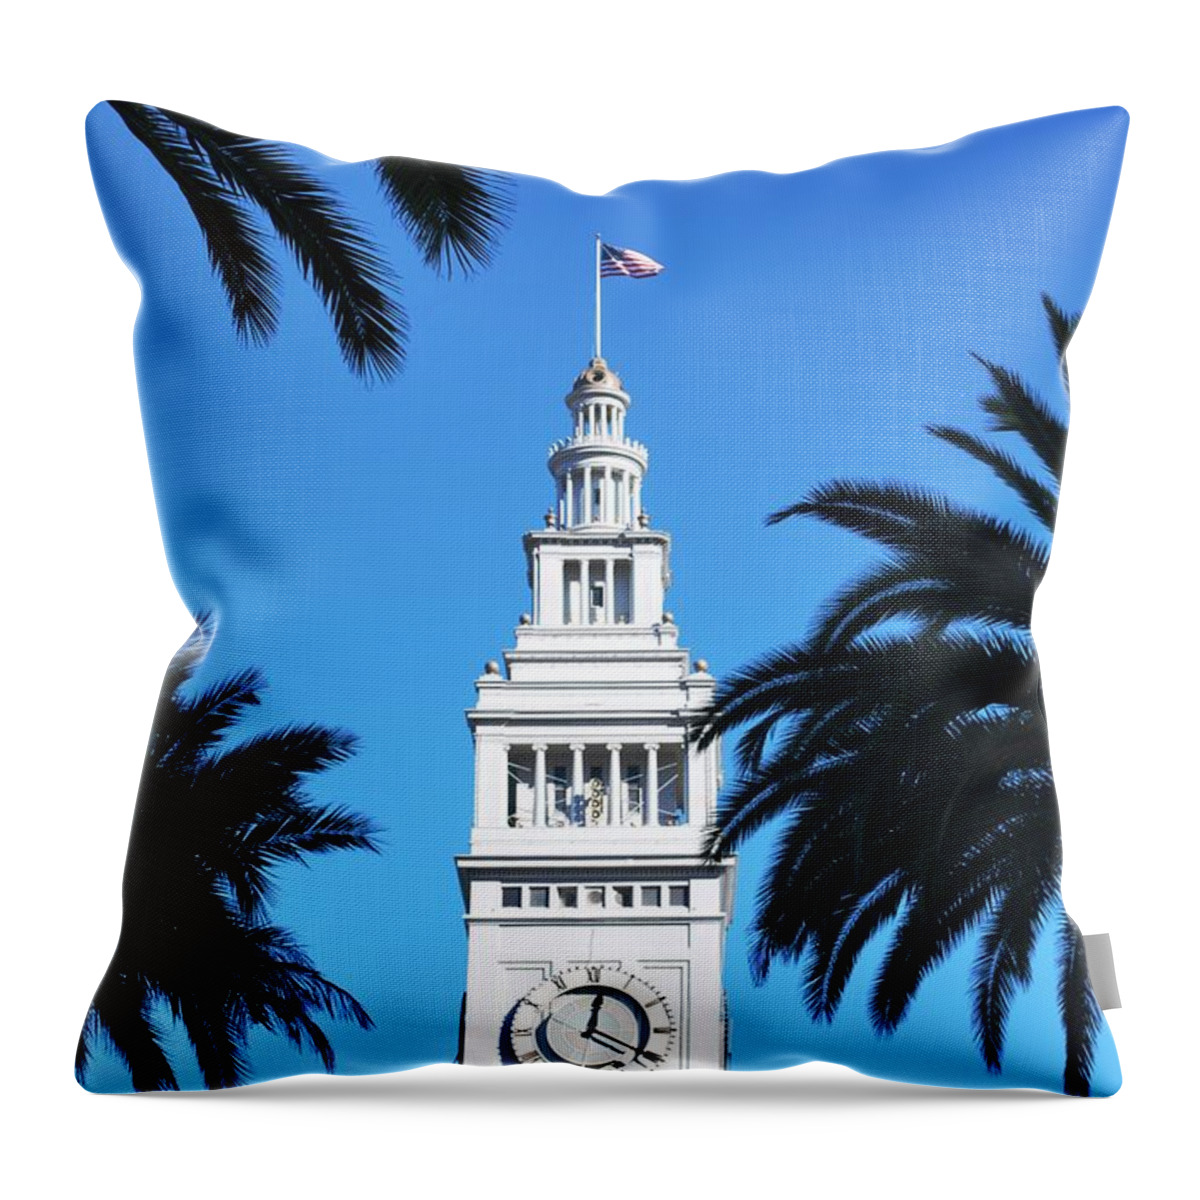 City Throw Pillow featuring the photograph Ferry Building and Palm Trees - San Francisco Embarcadero by Matt Quest